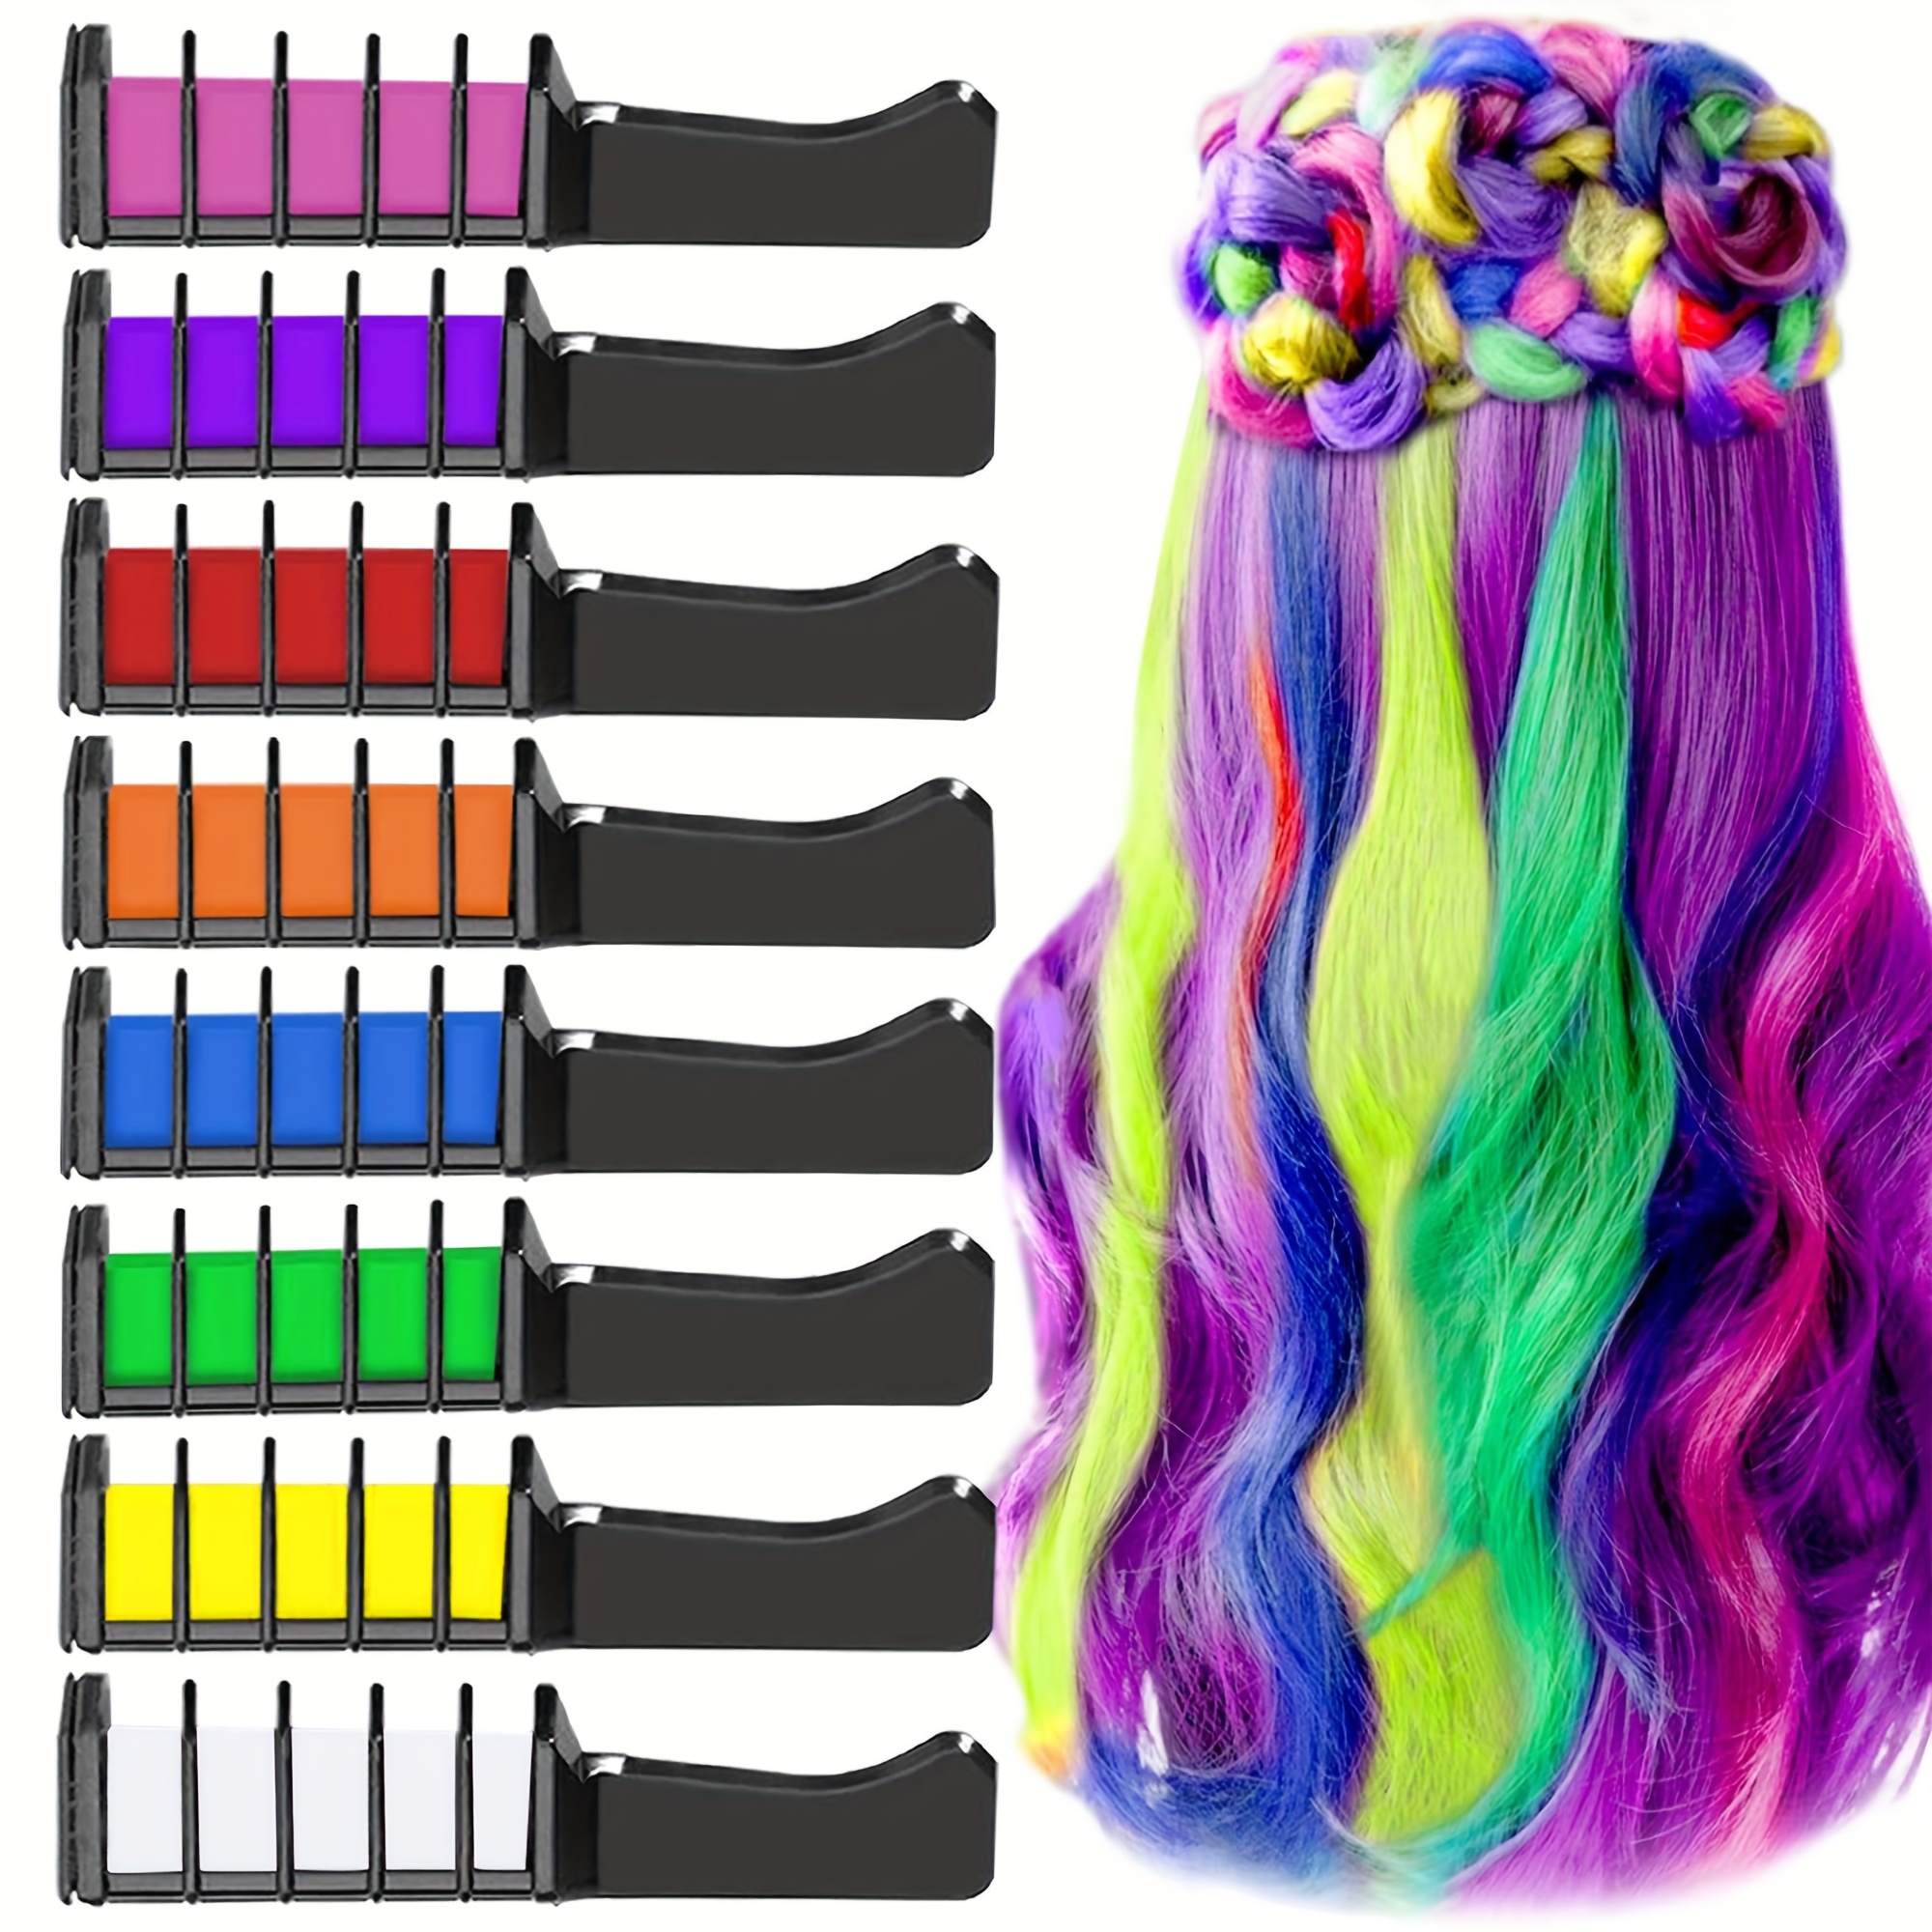 6 Colors Optional Hair Chalk For Kids, Temporary Hair Color Comb For Hair  Dye